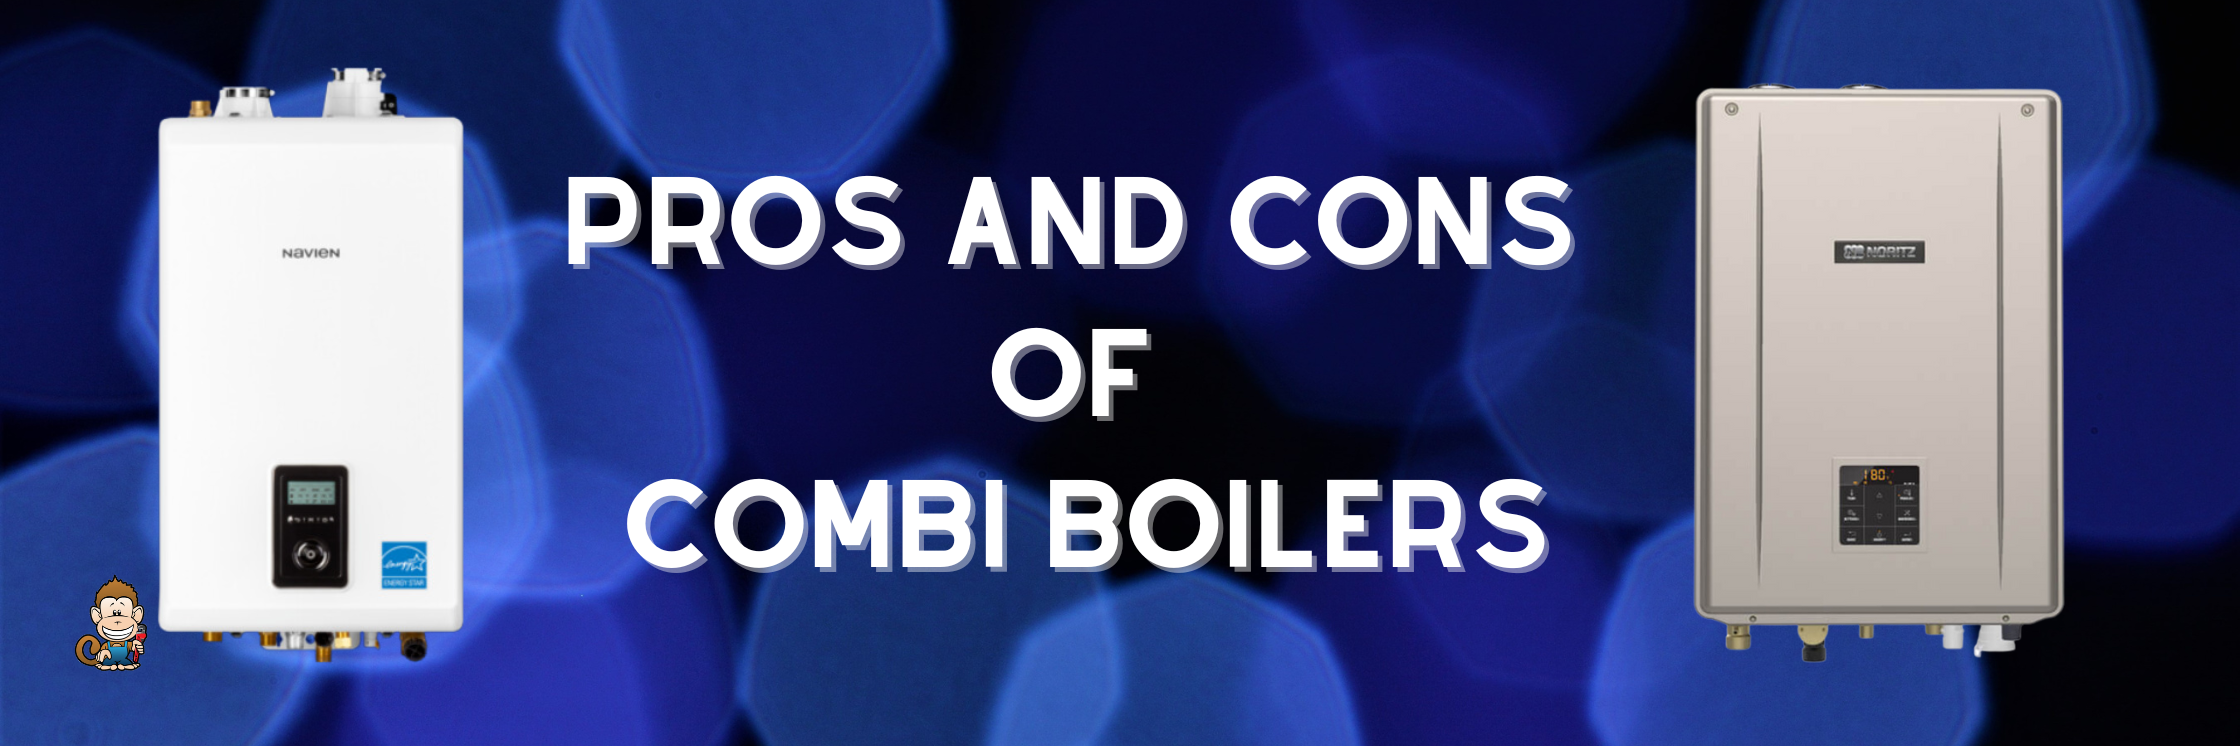 Pros and Cons of Combi Boilers